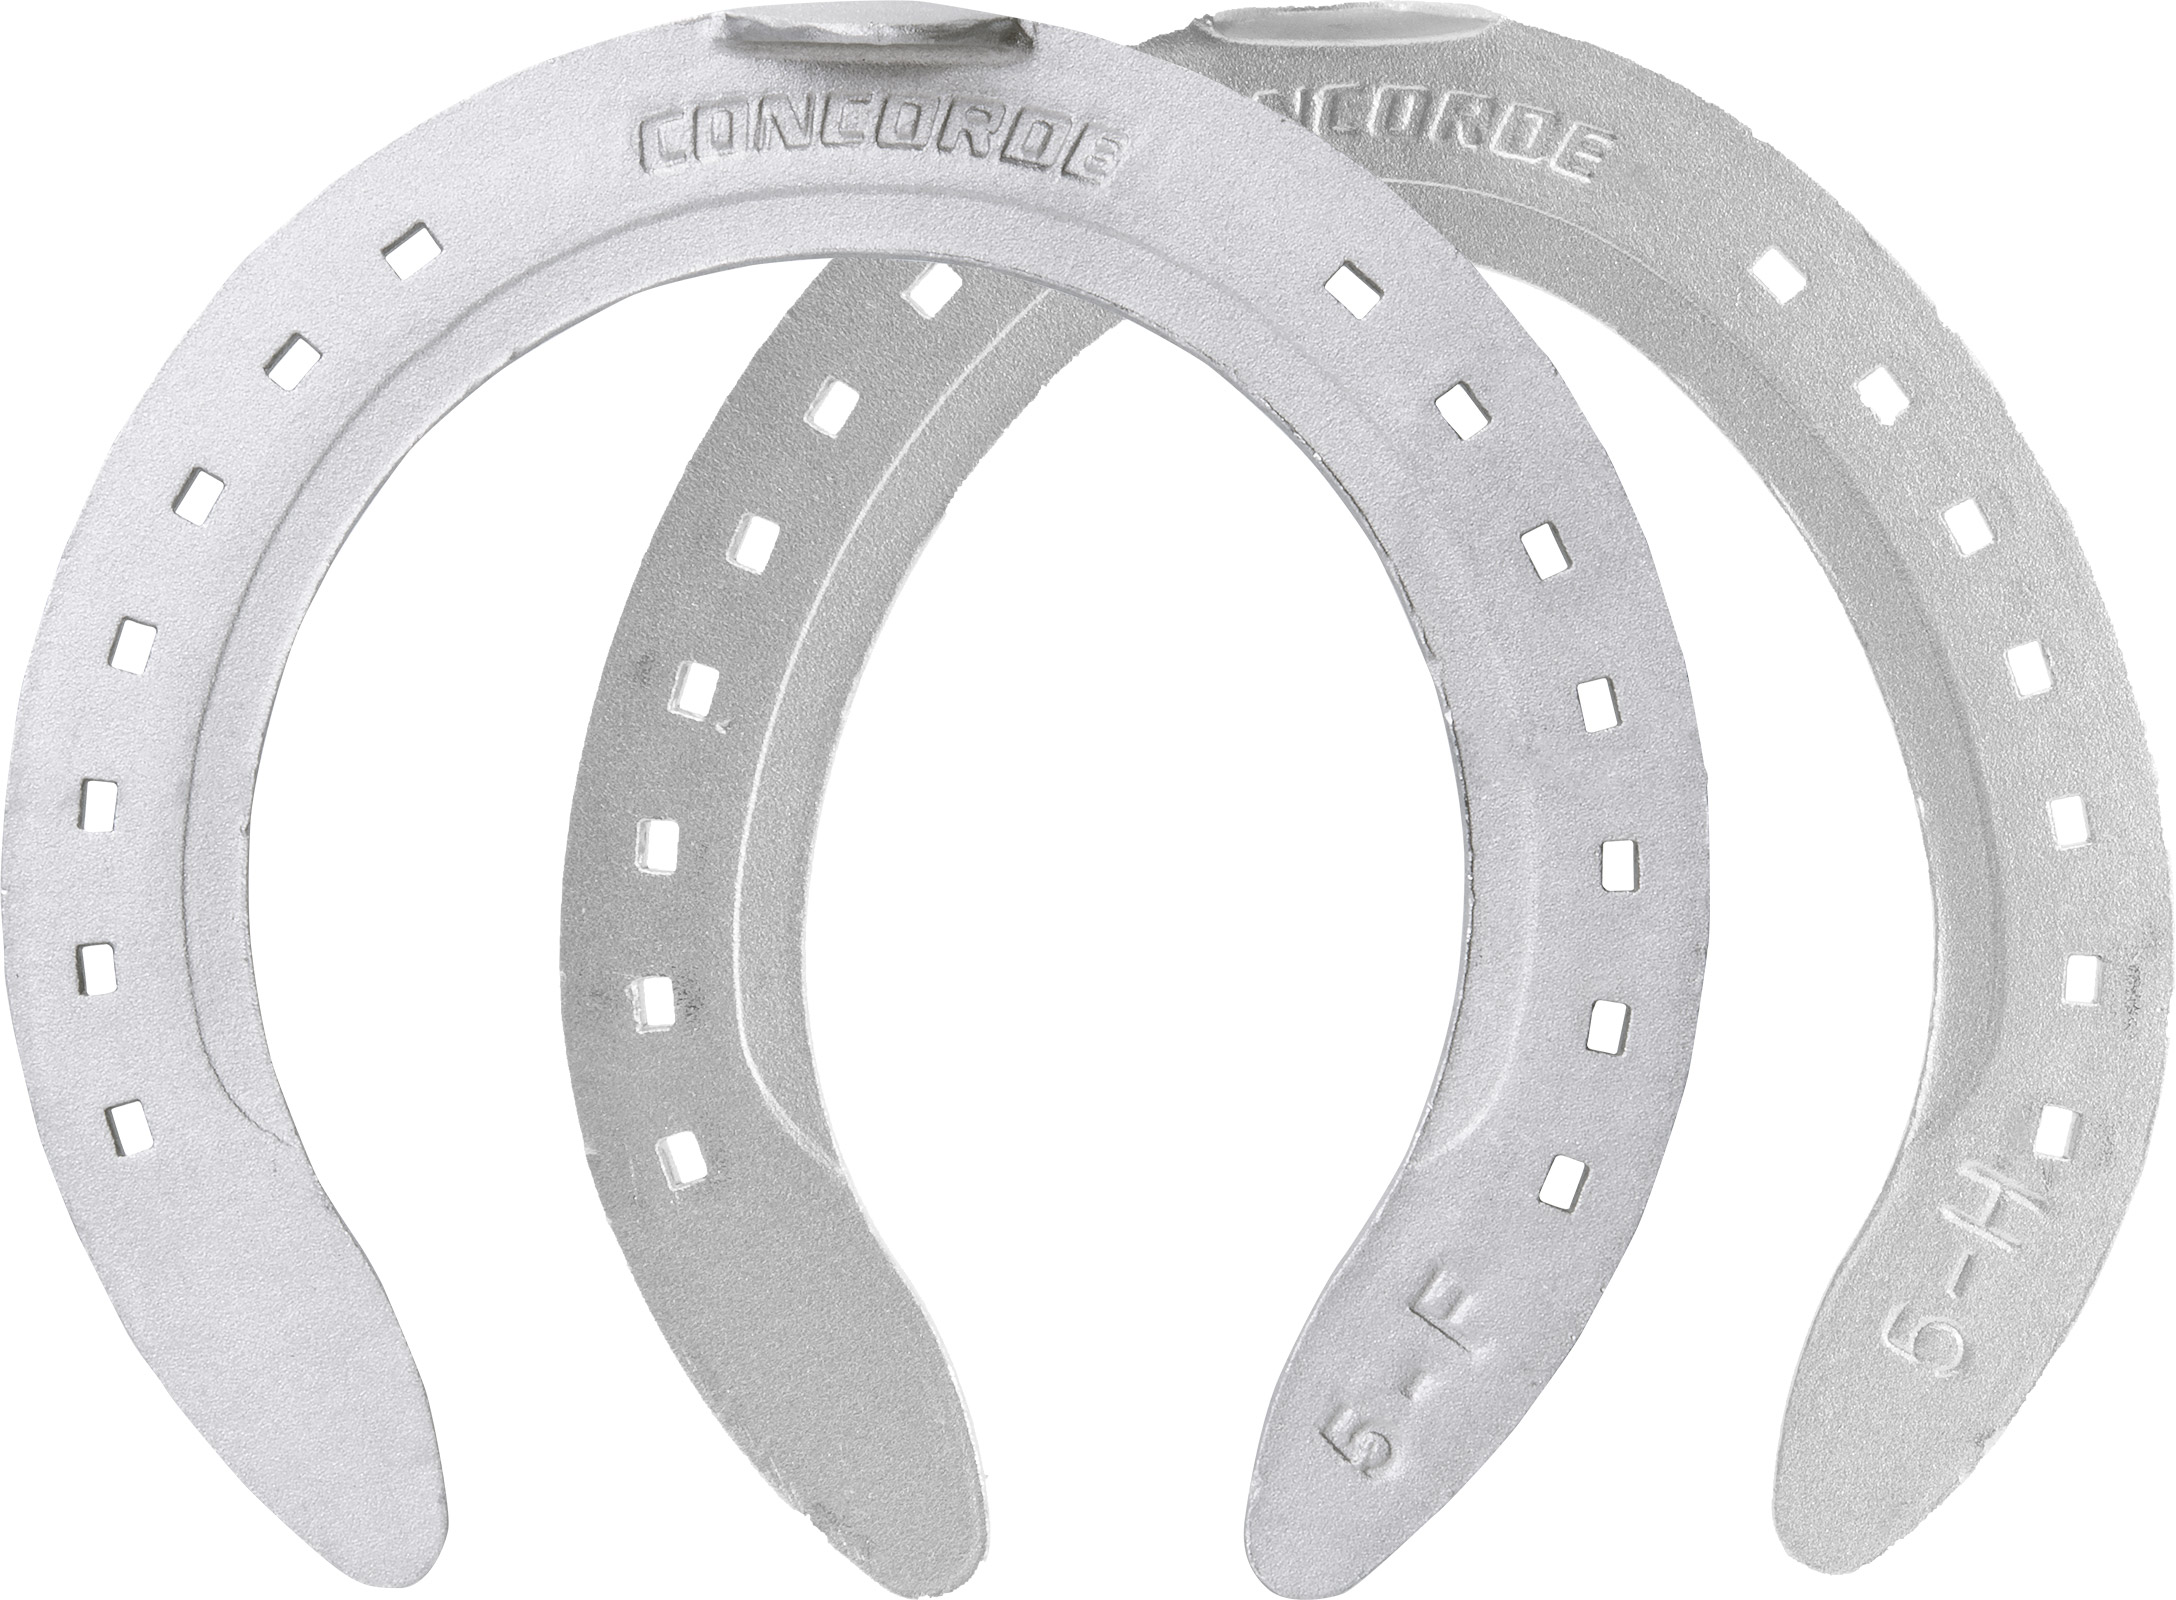 St. Croix Concorde Aluminum horseshoes, front and hind, hoof side view